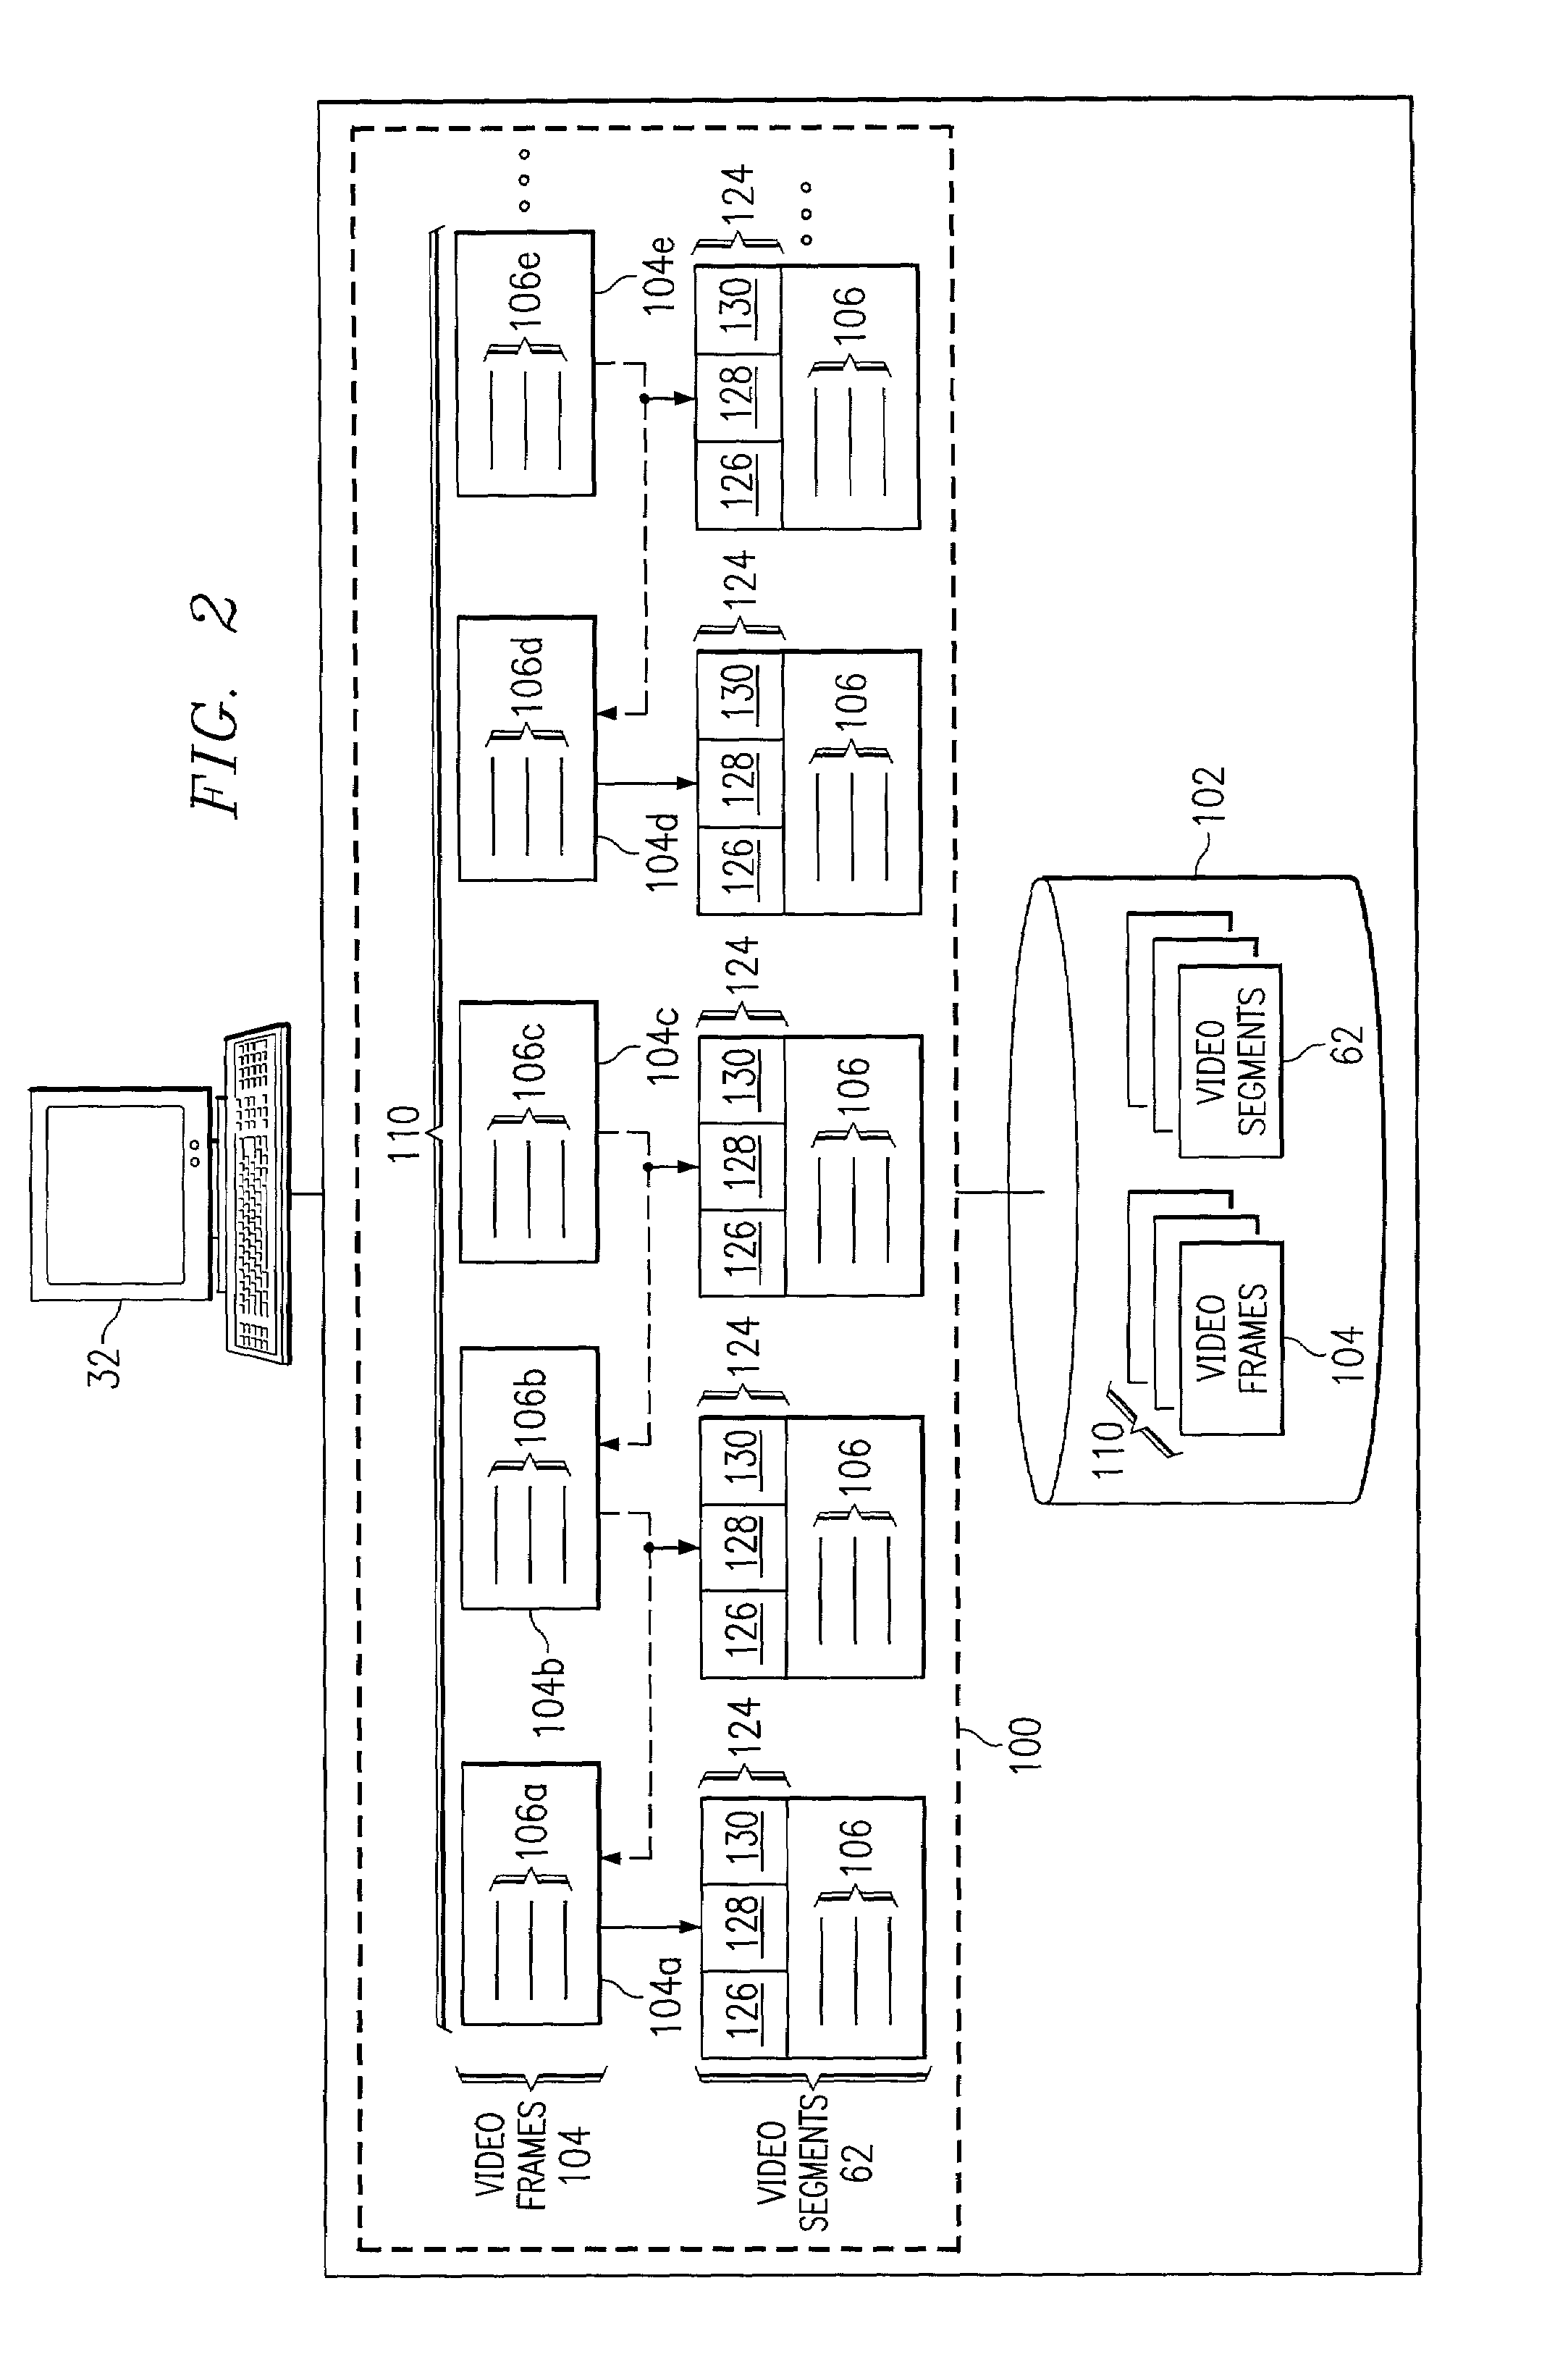 System and method for reproducing a video session using accelerated frame playback